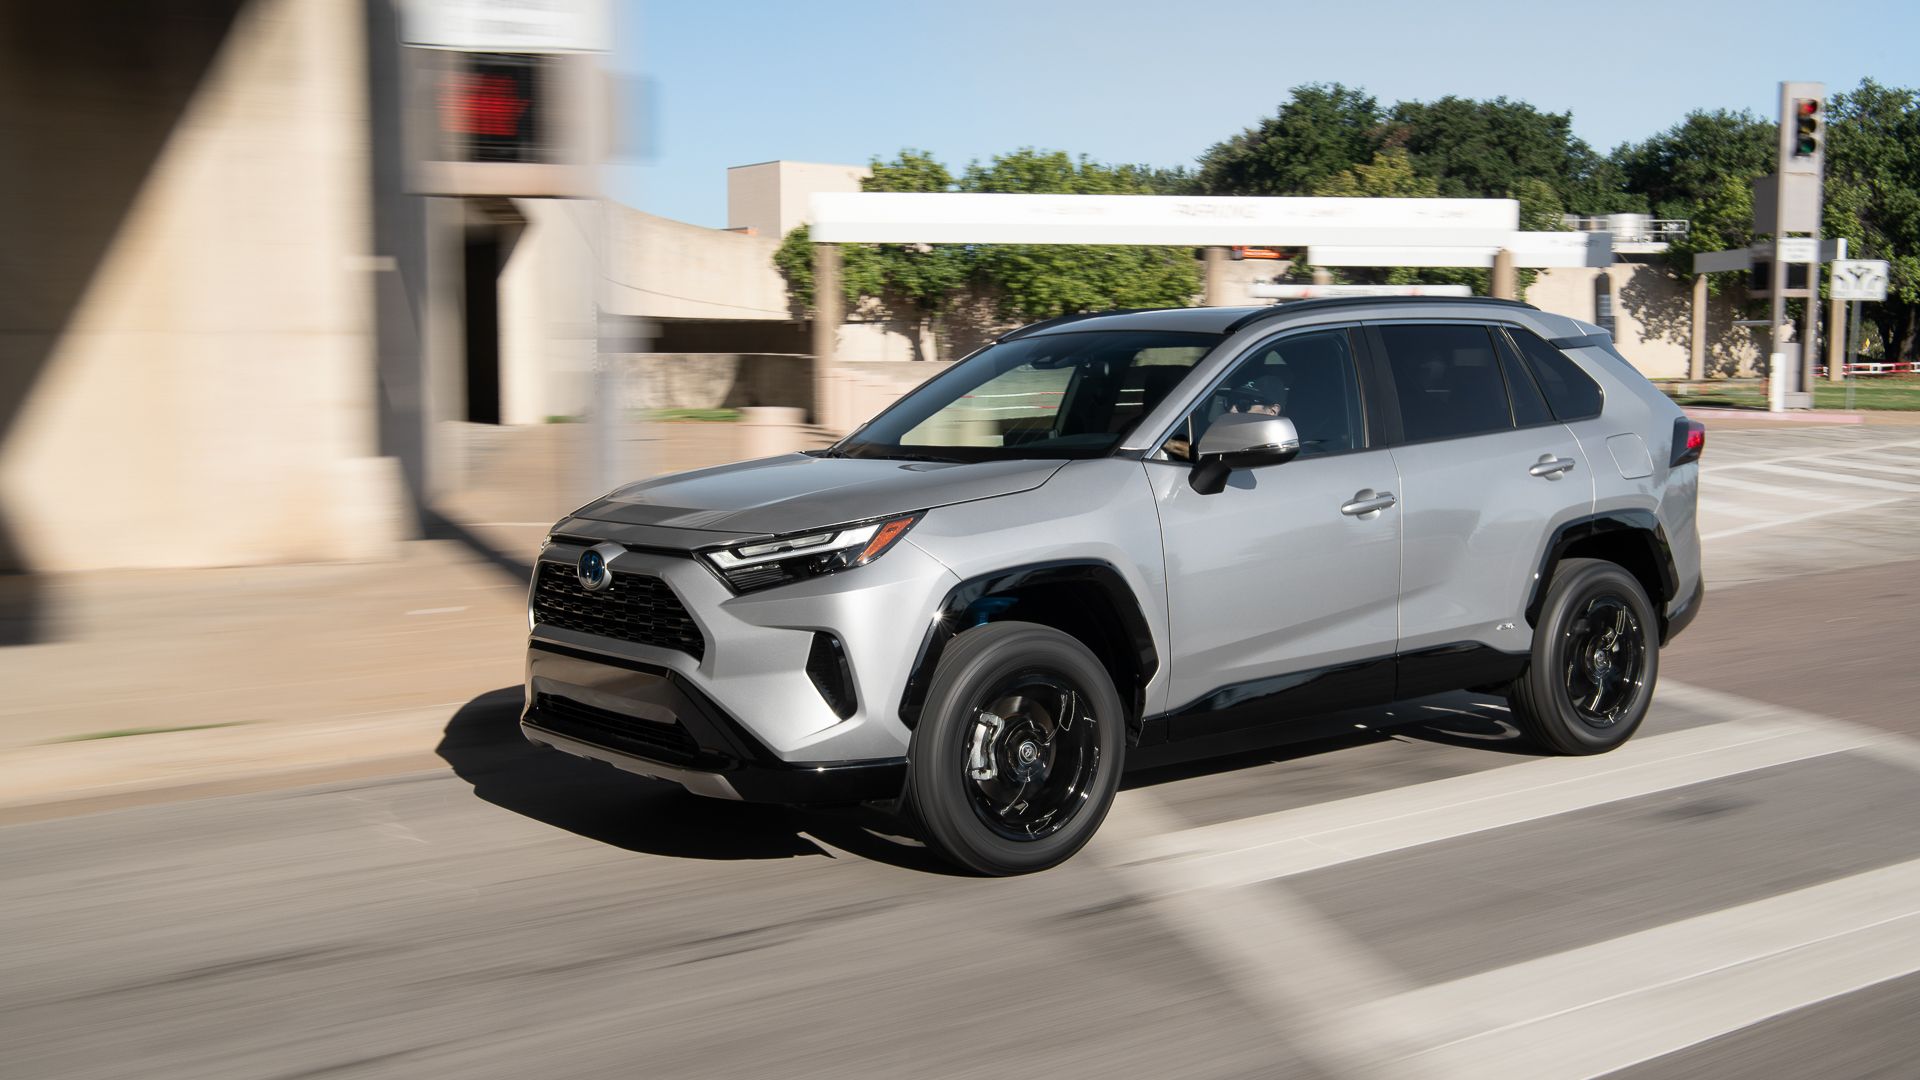 2024 Toyota RAV4 Review: Prices, Specs, and Photos - The Car